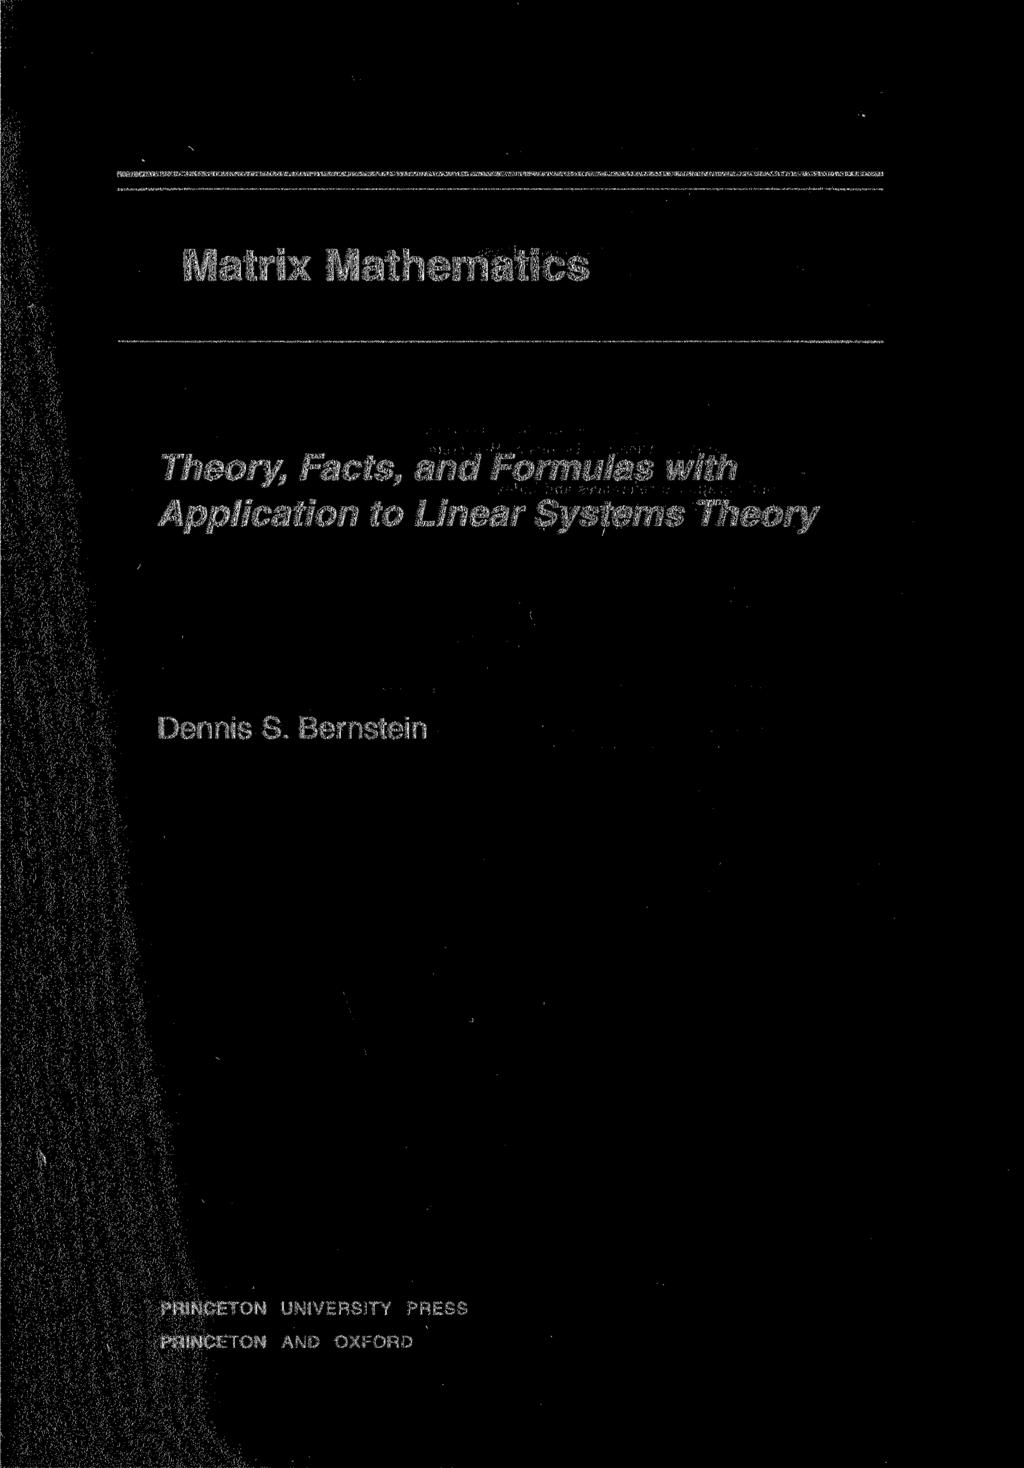 Matrix Mathematics Theory, Facts, and Formulas with Application to Linear